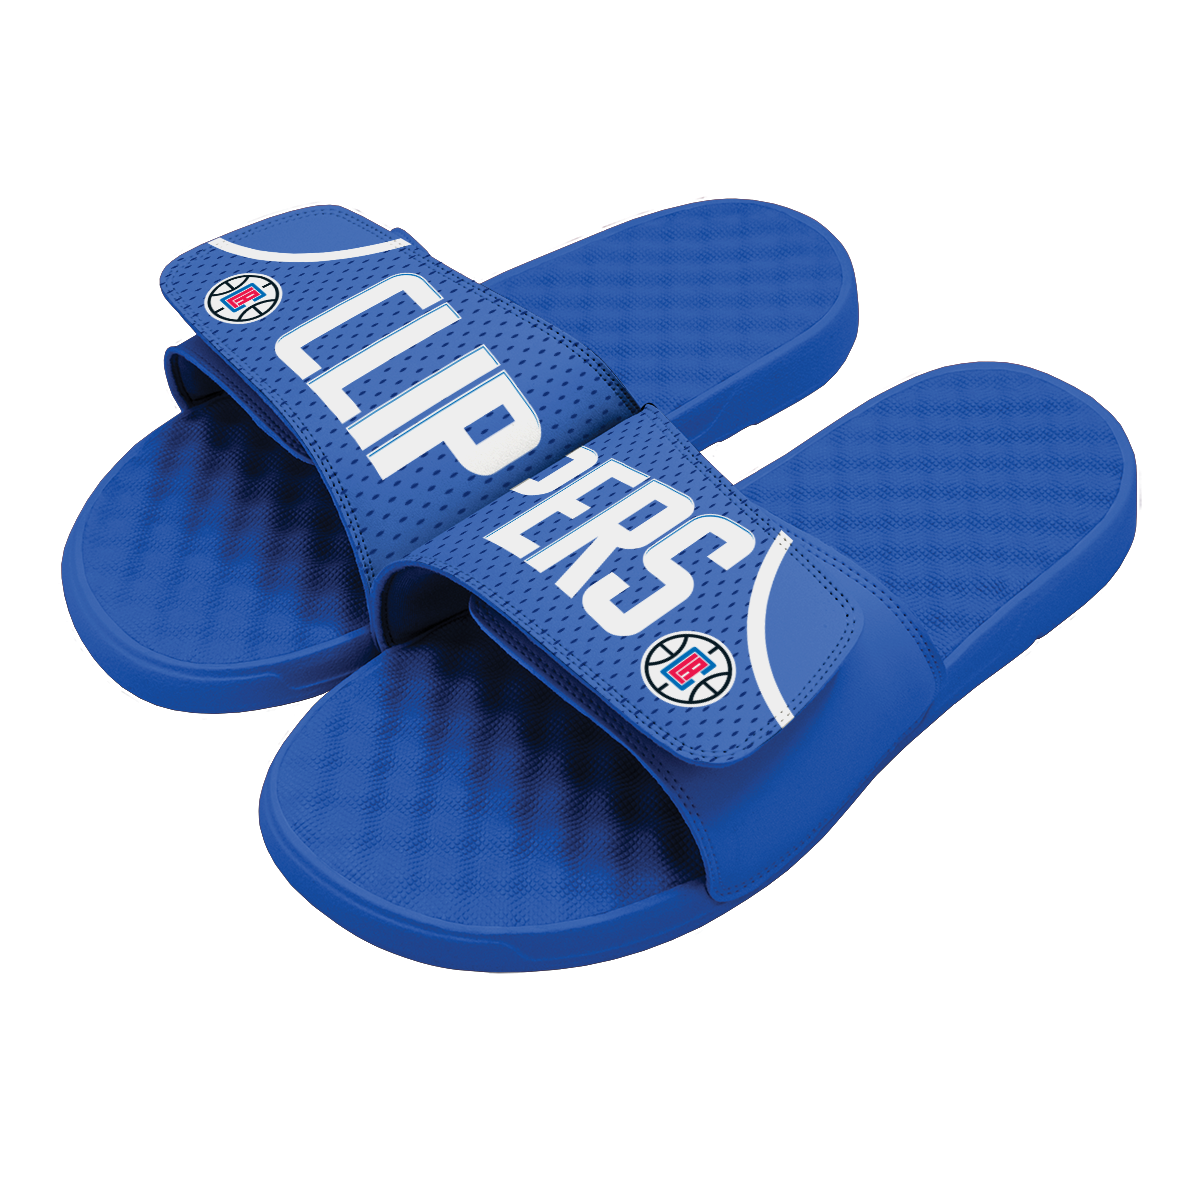 Los Angeles Clippers Away Jersey Slides